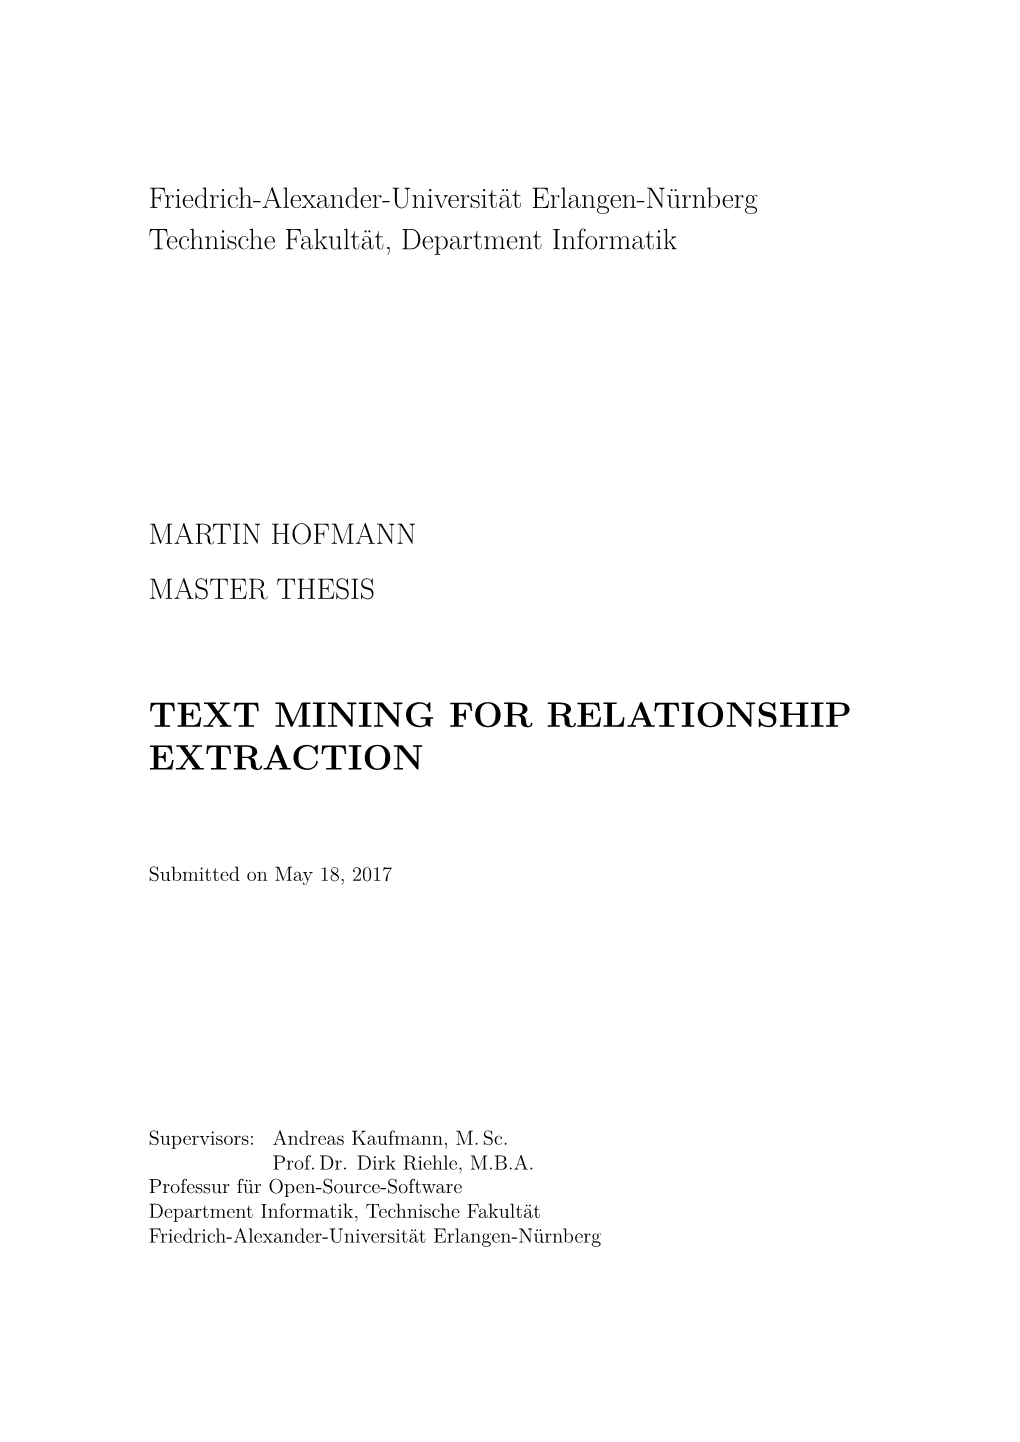 Text Mining for Relationship Extraction